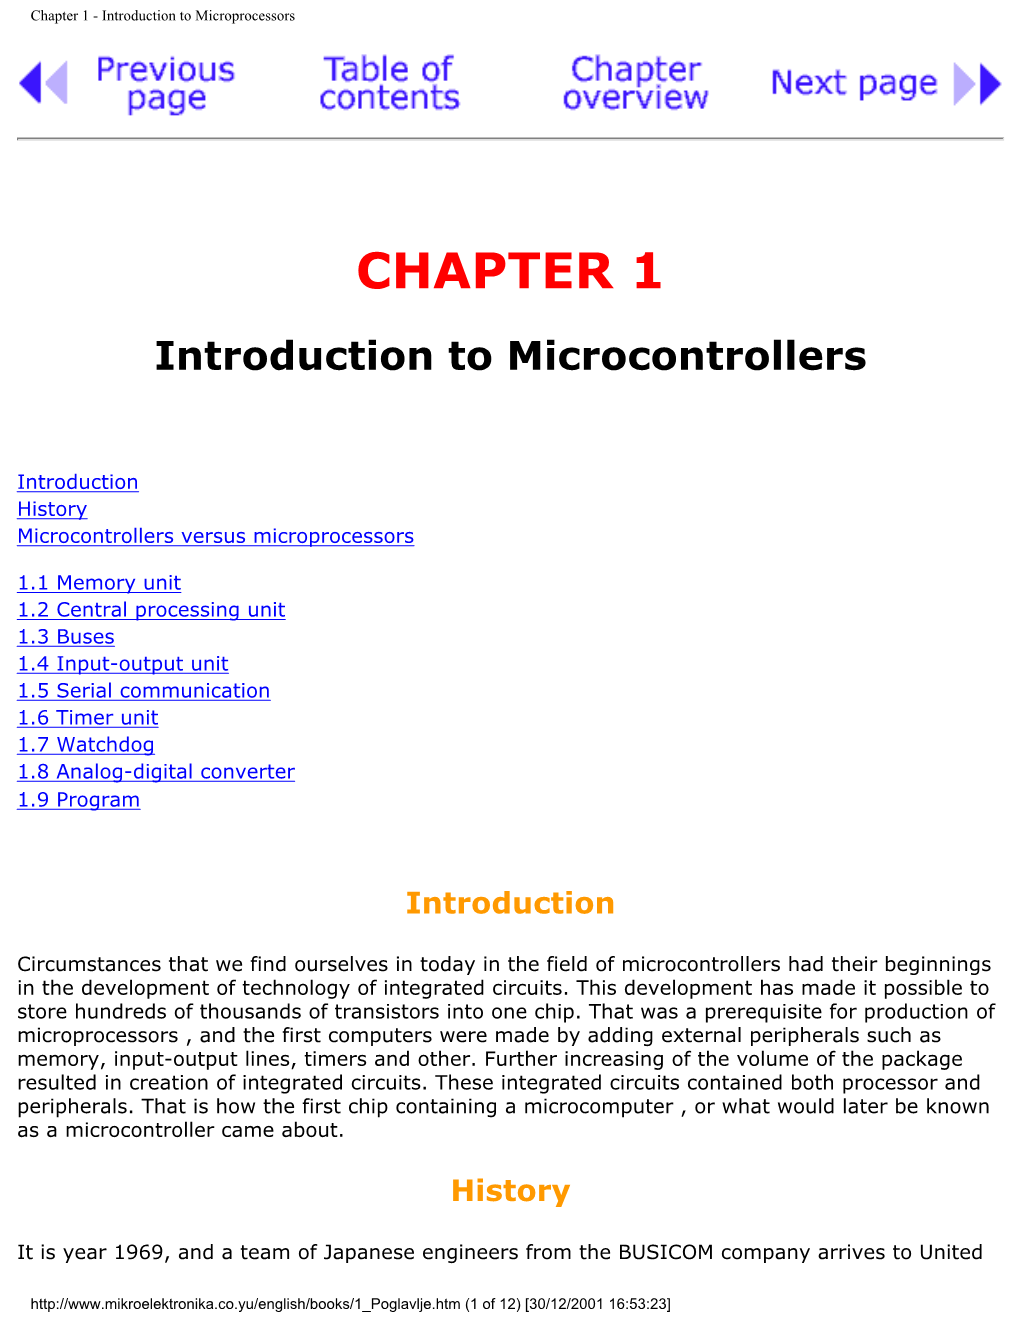 Chapter 1 - Introduction to Microprocessors